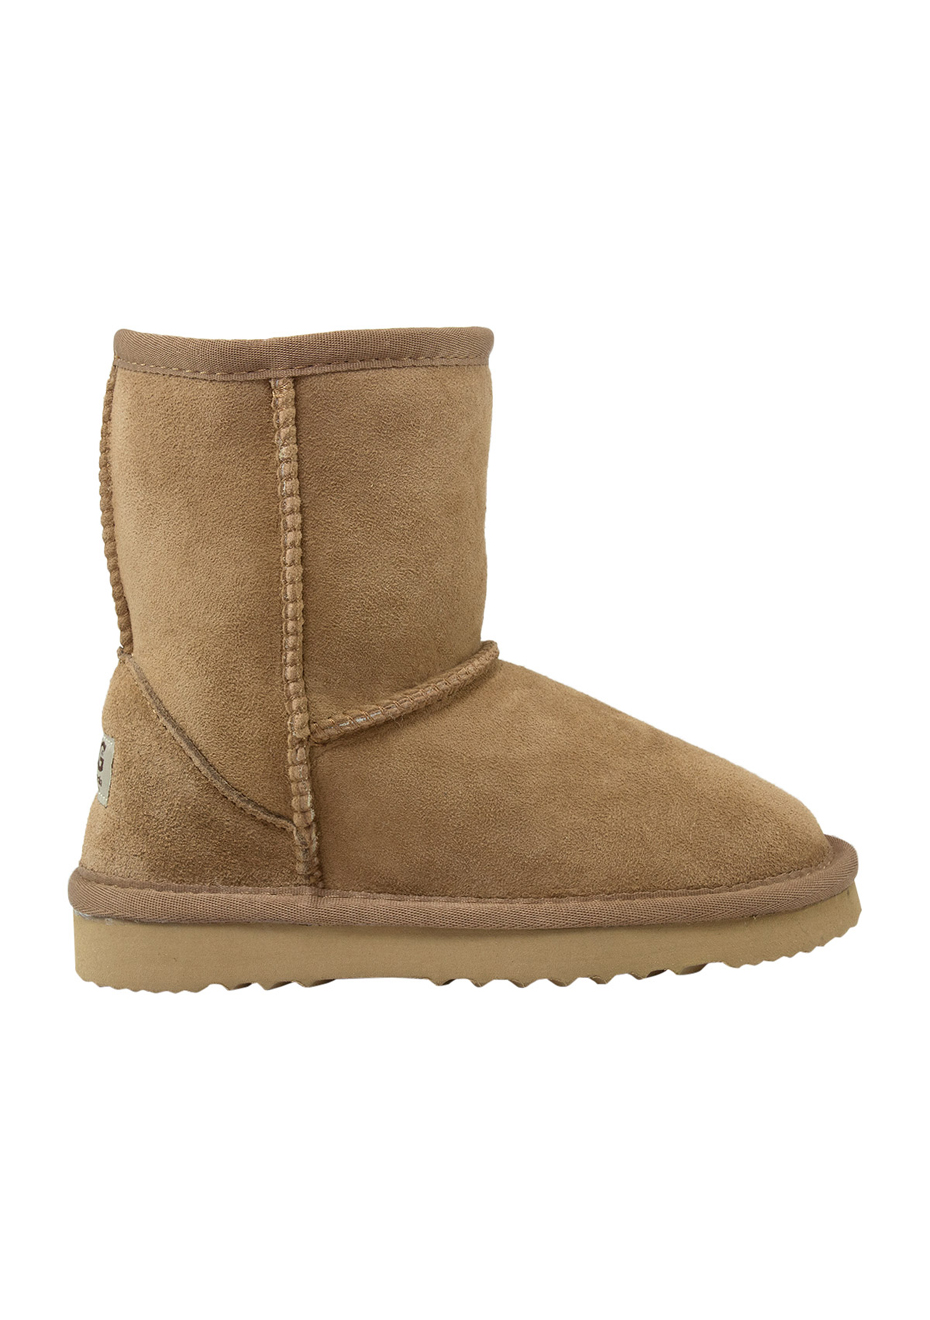 uggs for kids near me